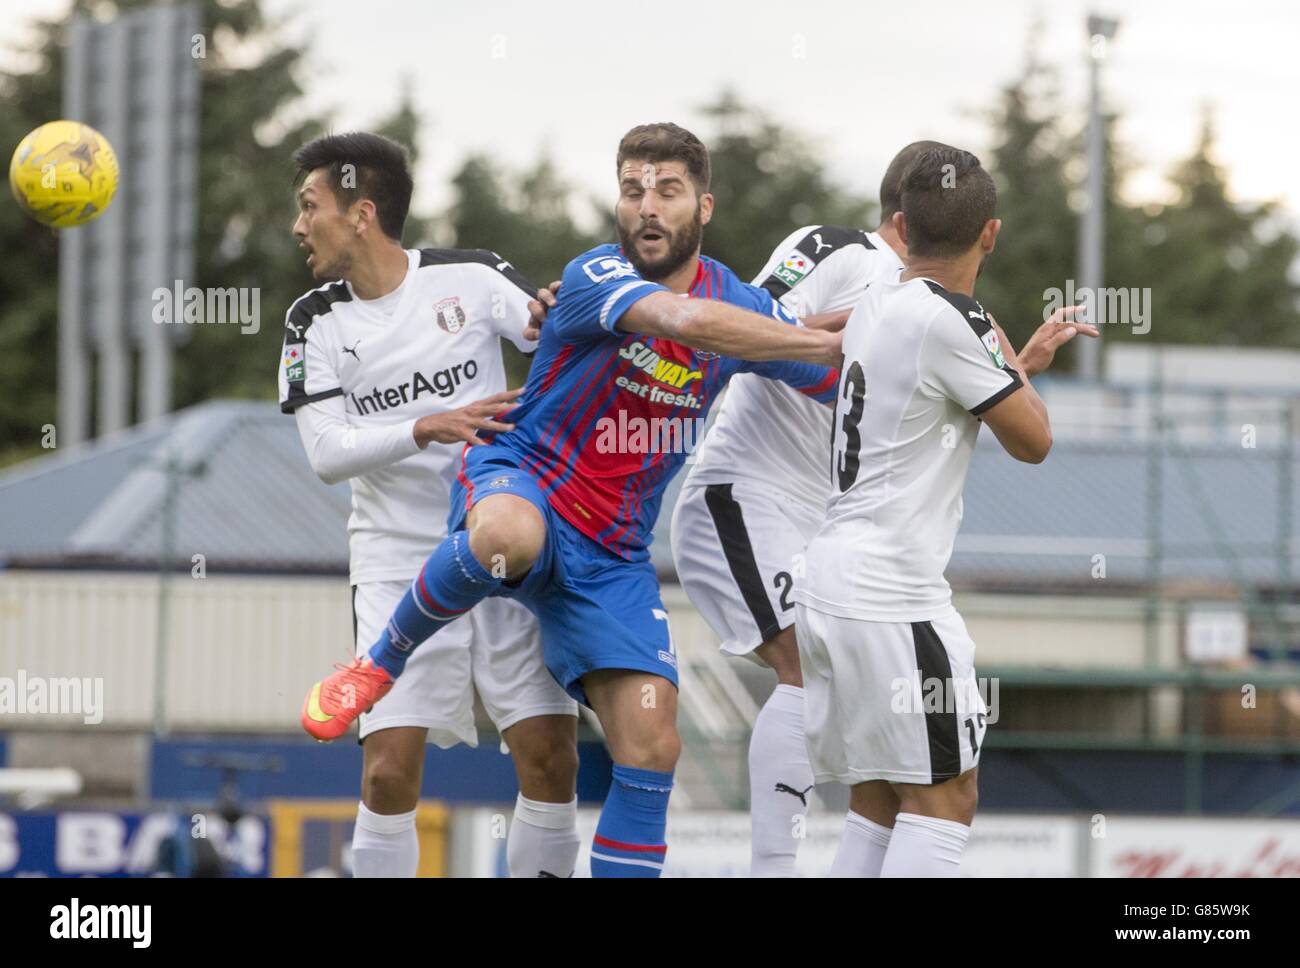 Inverness Caledonian Thistle's Dani Lopez (centre) takes on Astra Giurgiu's Takayuki Seto (left) and Junior Morais (right) during the Europa League Second Qualifying Round, First Leg, at Caledonian Stadium, Inverness, Scotland. PRESS ASSOCIATION Photo. Picture date: Thursday July 16, 2015. See PA story SOCCER Inverness. Photo credit should read: Jeff Holmes/PA Wire. Stock Photo